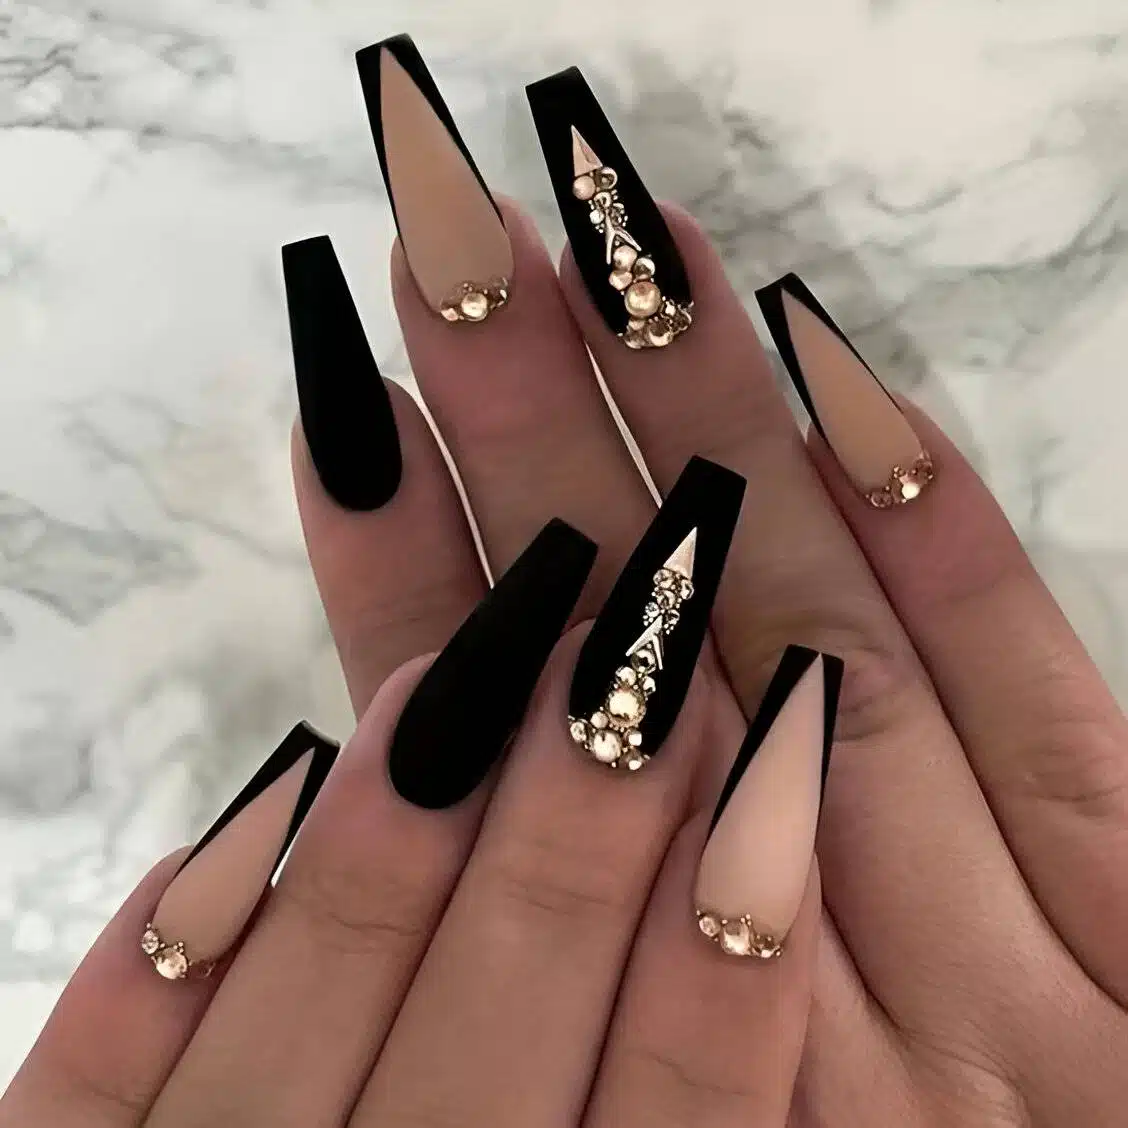 Attention, Beauty Queens: 30 Irresistible Black Acrylic Nail Designs - 249